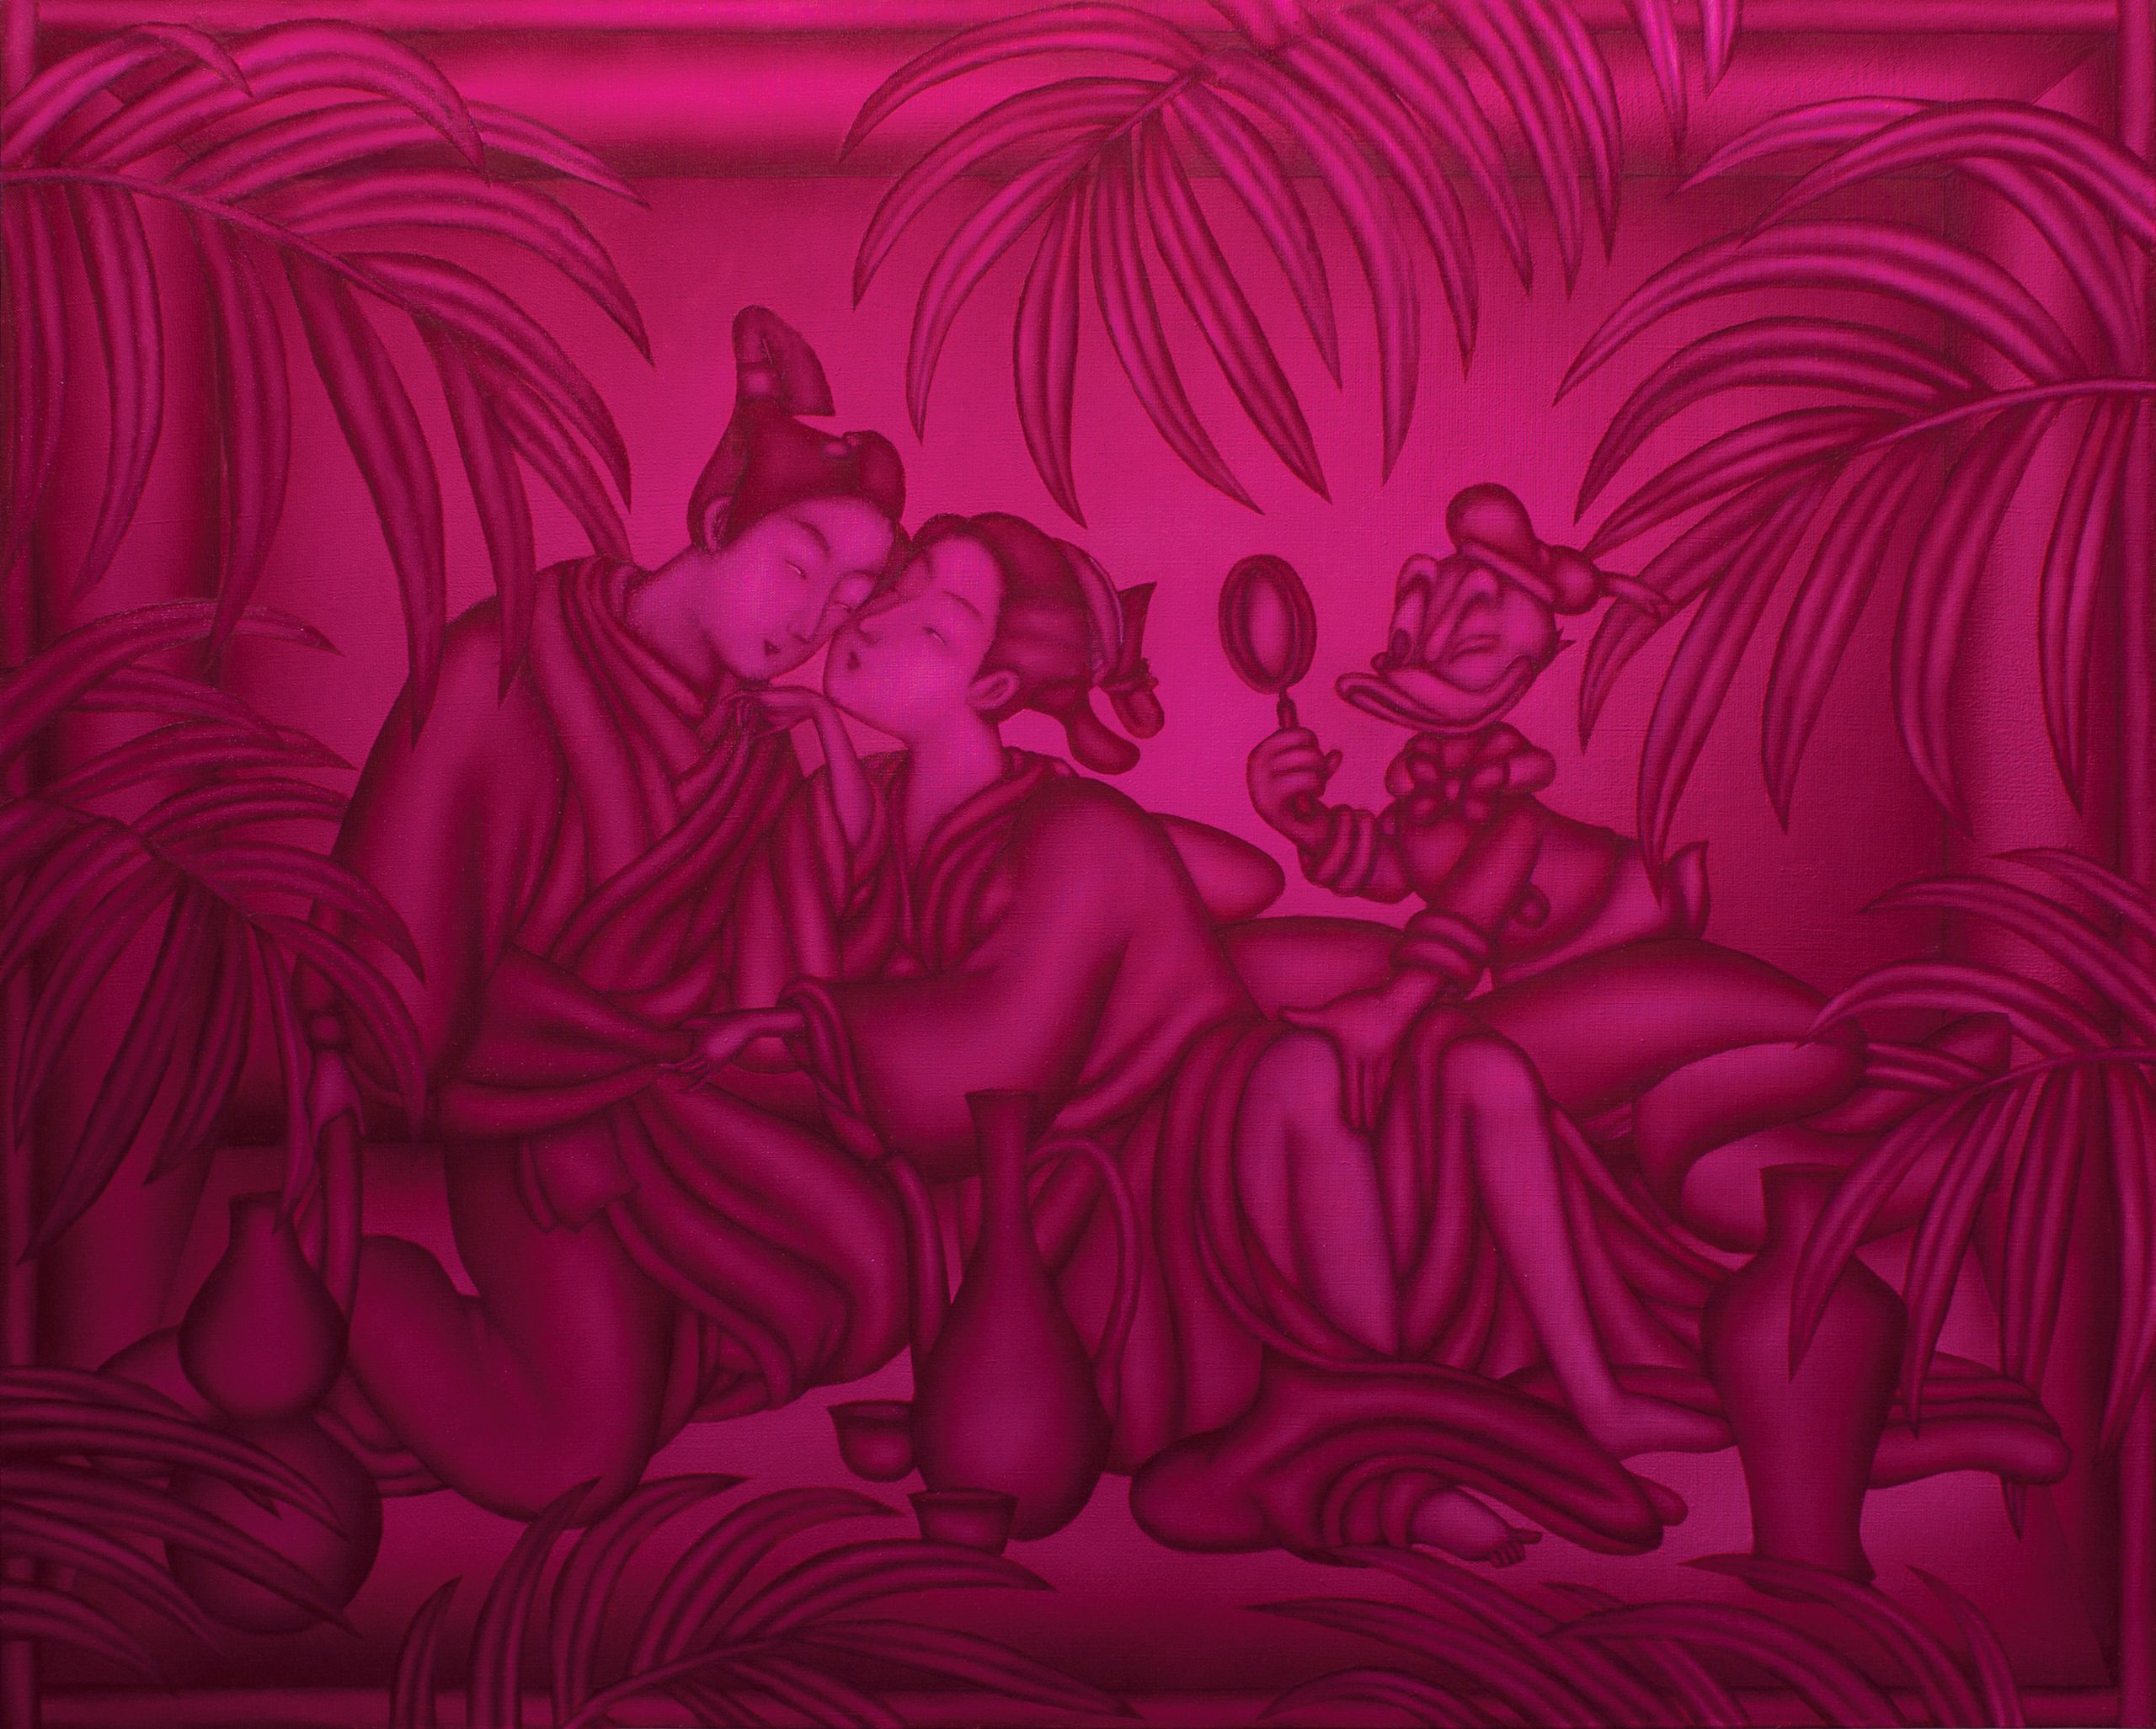 This is a horizontally oriented oil painting by Mathew Tom in which the entire background is painted an intense fuschia pink and bordered by a painted frame. The main imagery on the canvas is painted in subtle black gradients and consists of an erotic scene of a seated kimono-clad woman with her legs spread apart. She is unfastening the robe of a kneeling man and the couple is about to kiss. The image is sampled from what looks to be Shunga Edo period Japanese art. Donald Duck appears on the right side of the canvas wielding a magnifying glass to inspect the couple as he reaches out to grope the woman. Vases, jugs, palm branches frame the picture. The artist describes his intention for the work as, reinterpretations of historical artworks have become a playful way for him to express his mixed, Chinese-American cultural identity. His childhood in Florida spawned an interest in pop media and how it functions as modern-day religious iconography. By juxtaposing these symbols with art historical references, Tom investigates cultural appropriation and its broader meaning in an increasingly borderless, globalized society